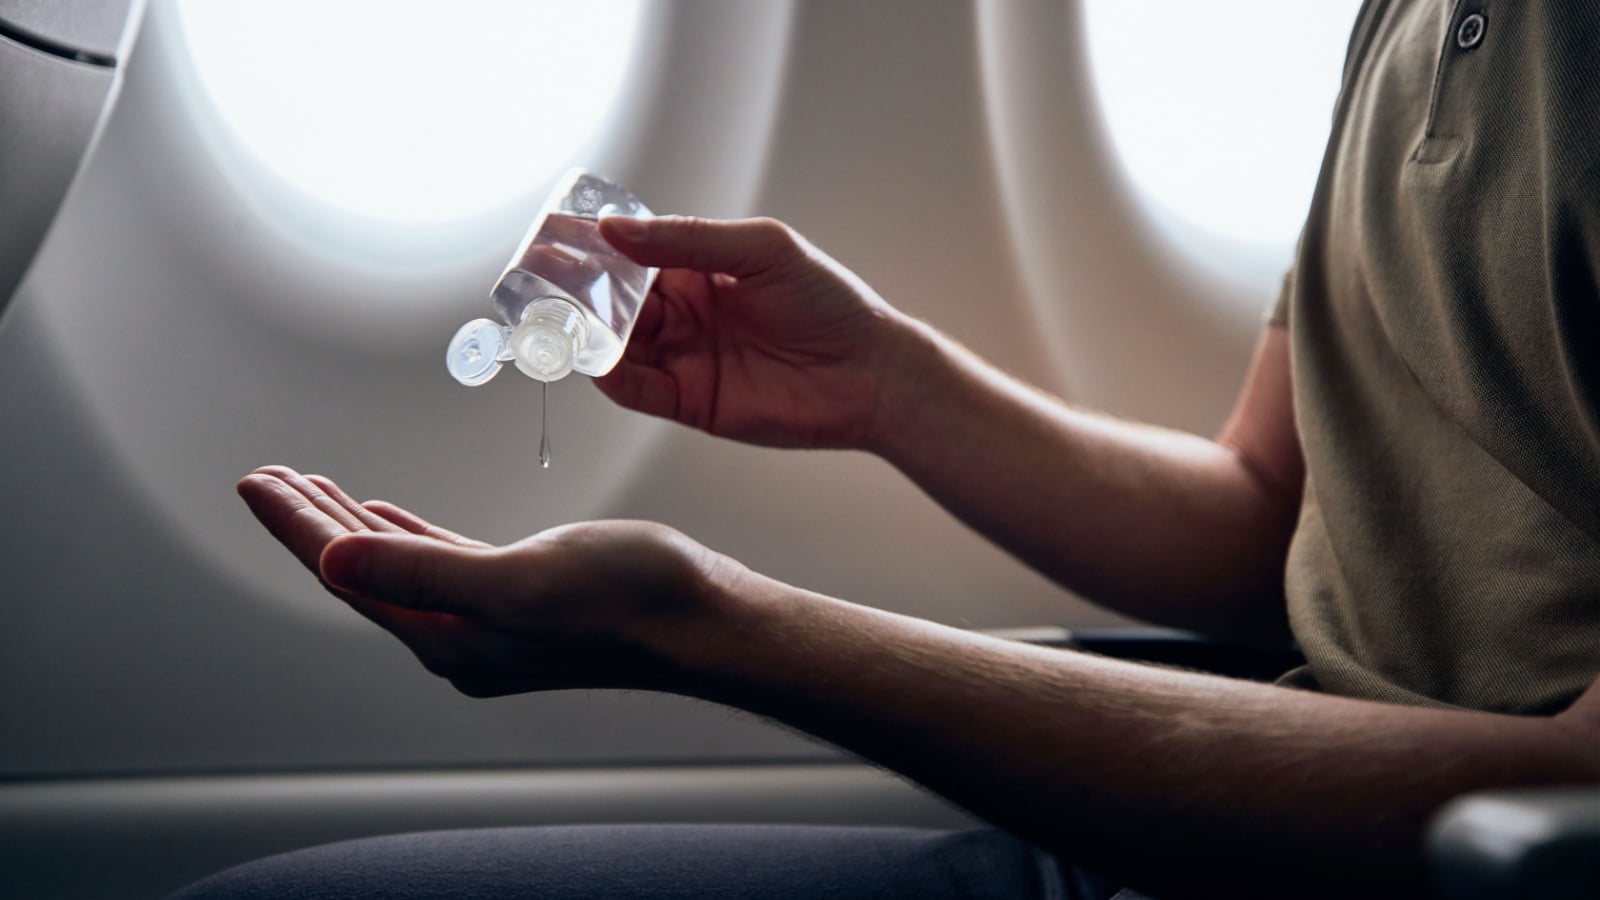 Man using hand sanitizer inside airplane during flight. Themes new normal, coronavirus and personal protection.